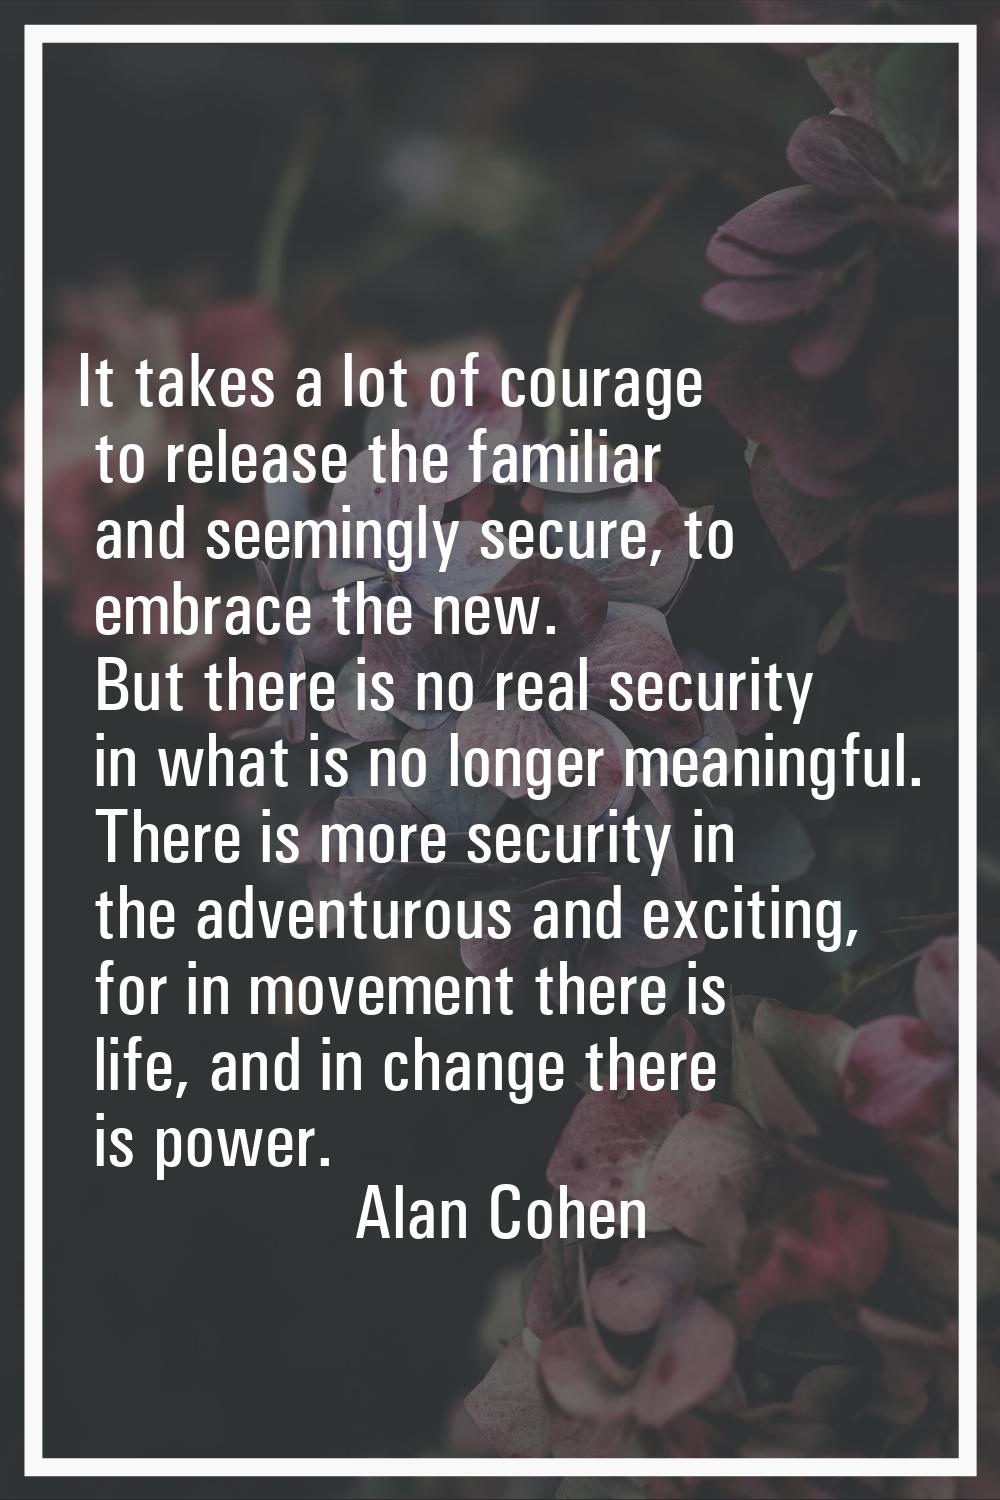 It takes a lot of courage to release the familiar and seemingly secure, to embrace the new. But the